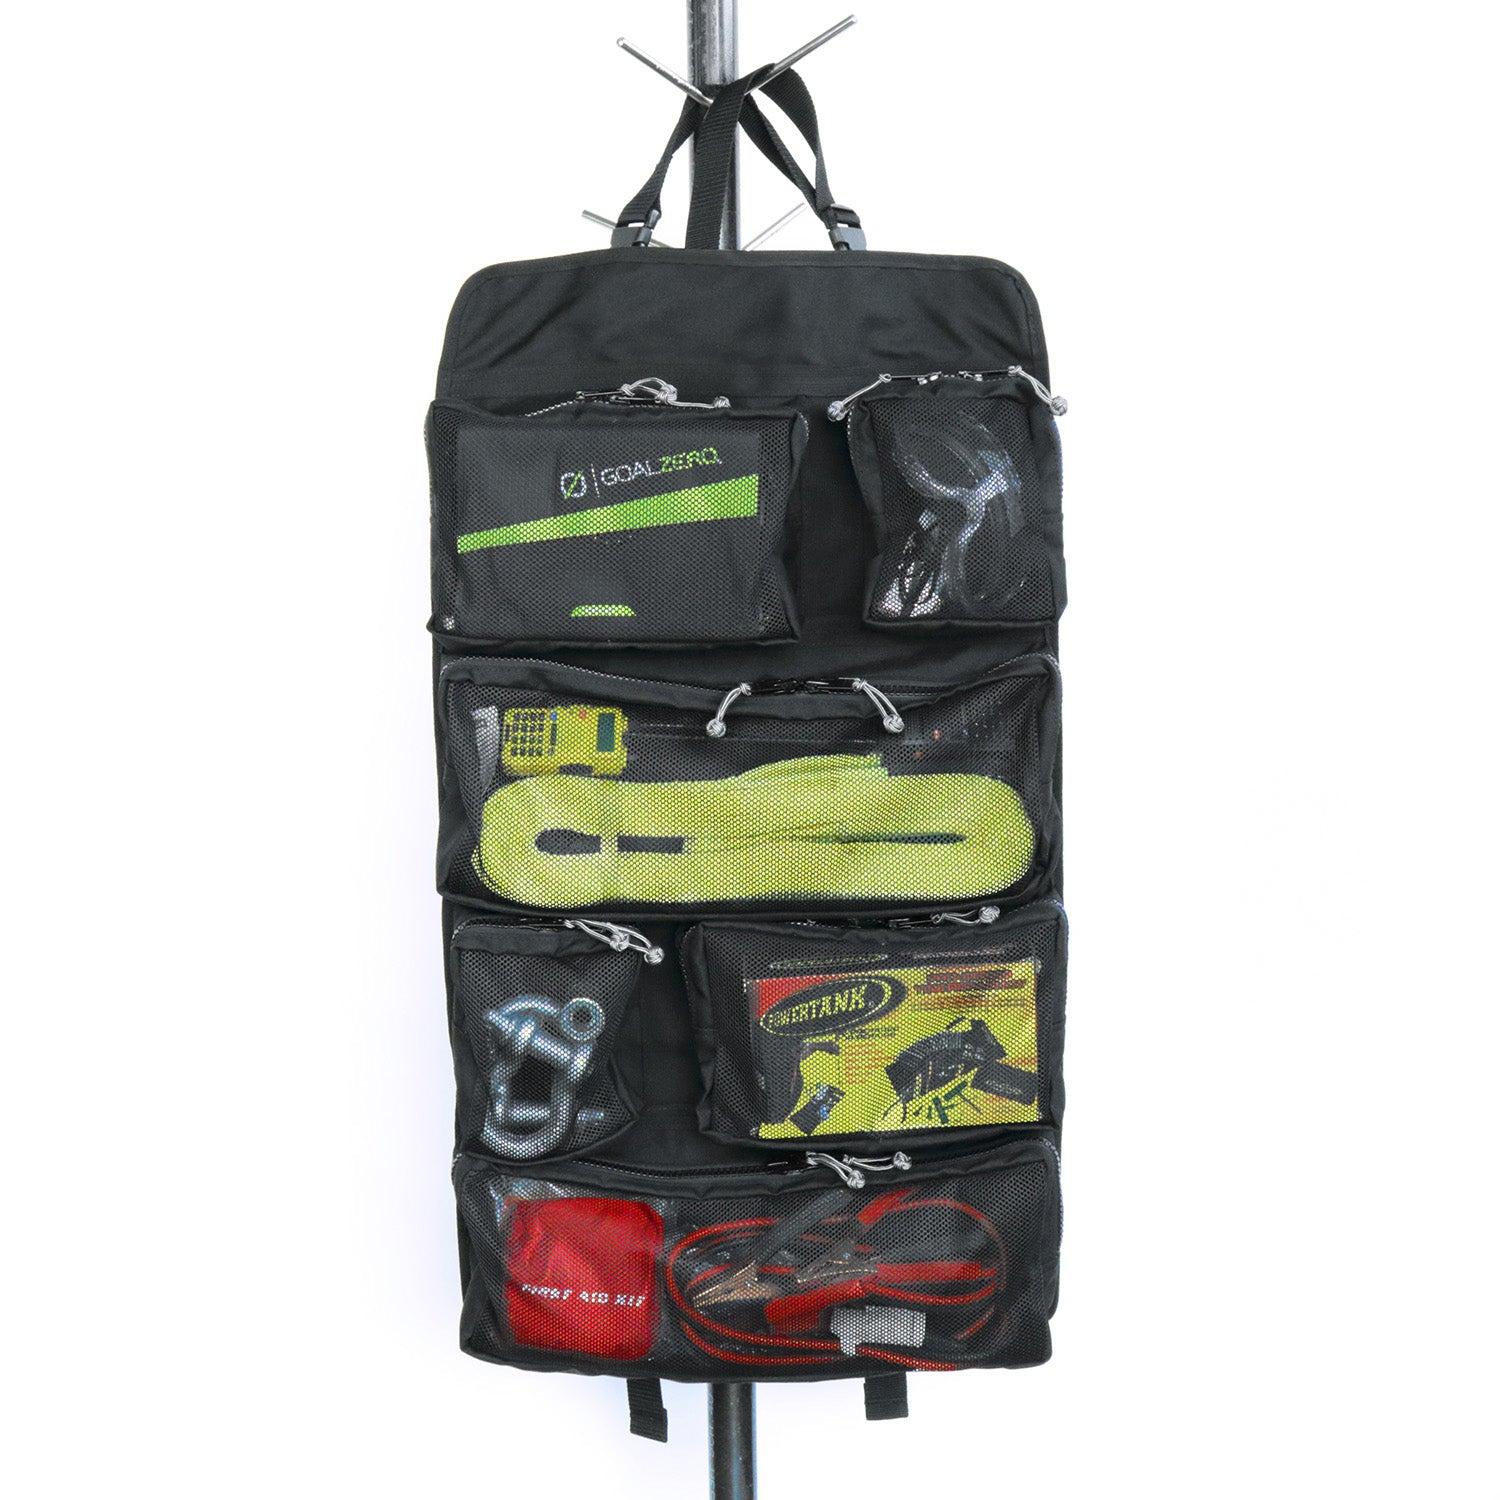 Big Bull tool roll with offroad recovery gear stowed. 